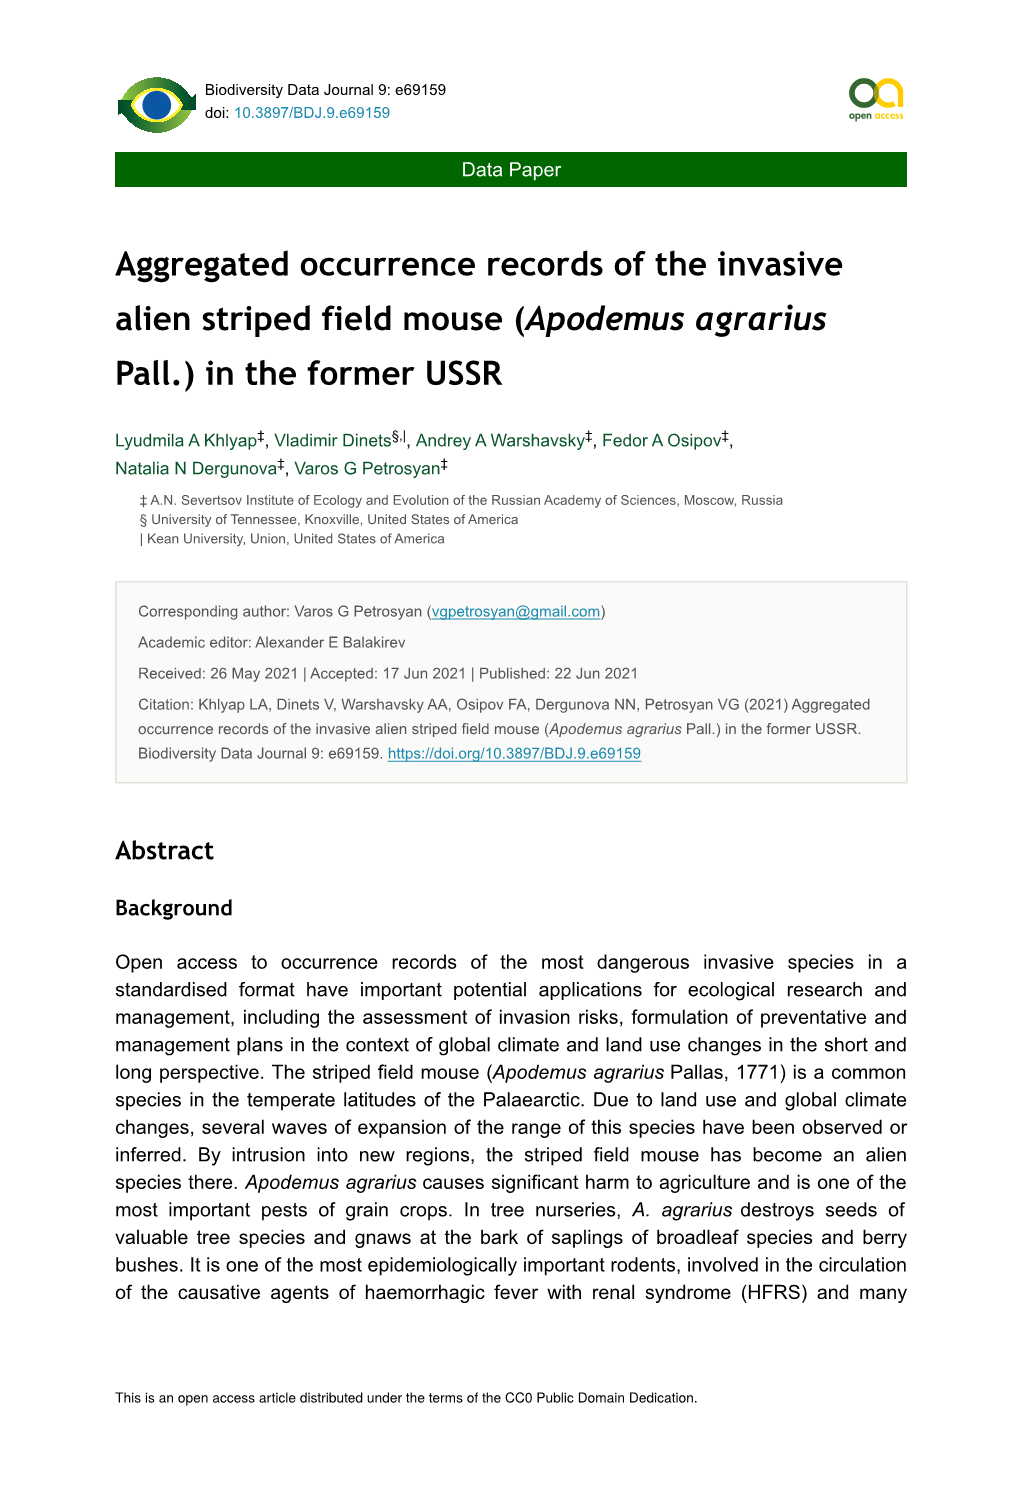 Aggregated Occurrence Records of the Invasive Alien Striped Field Mouse (Apodemus Agrarius Pall.) in the Former USSR